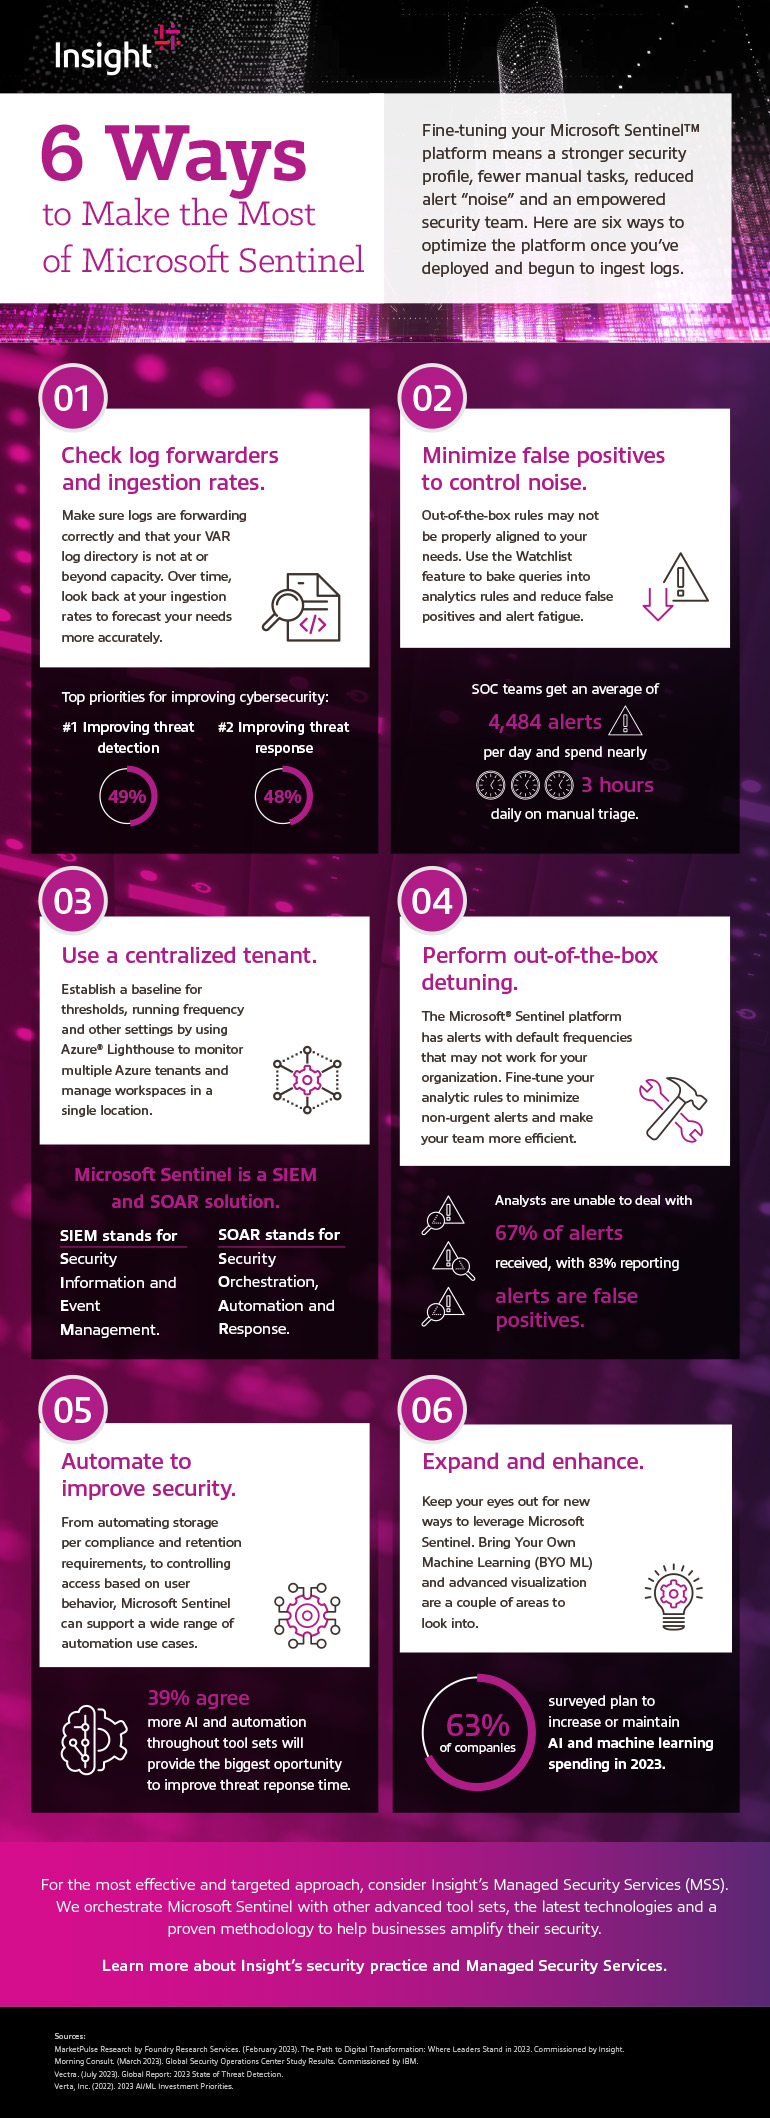 6 Ways to Make the Most of Microsoft Sentinel infographic